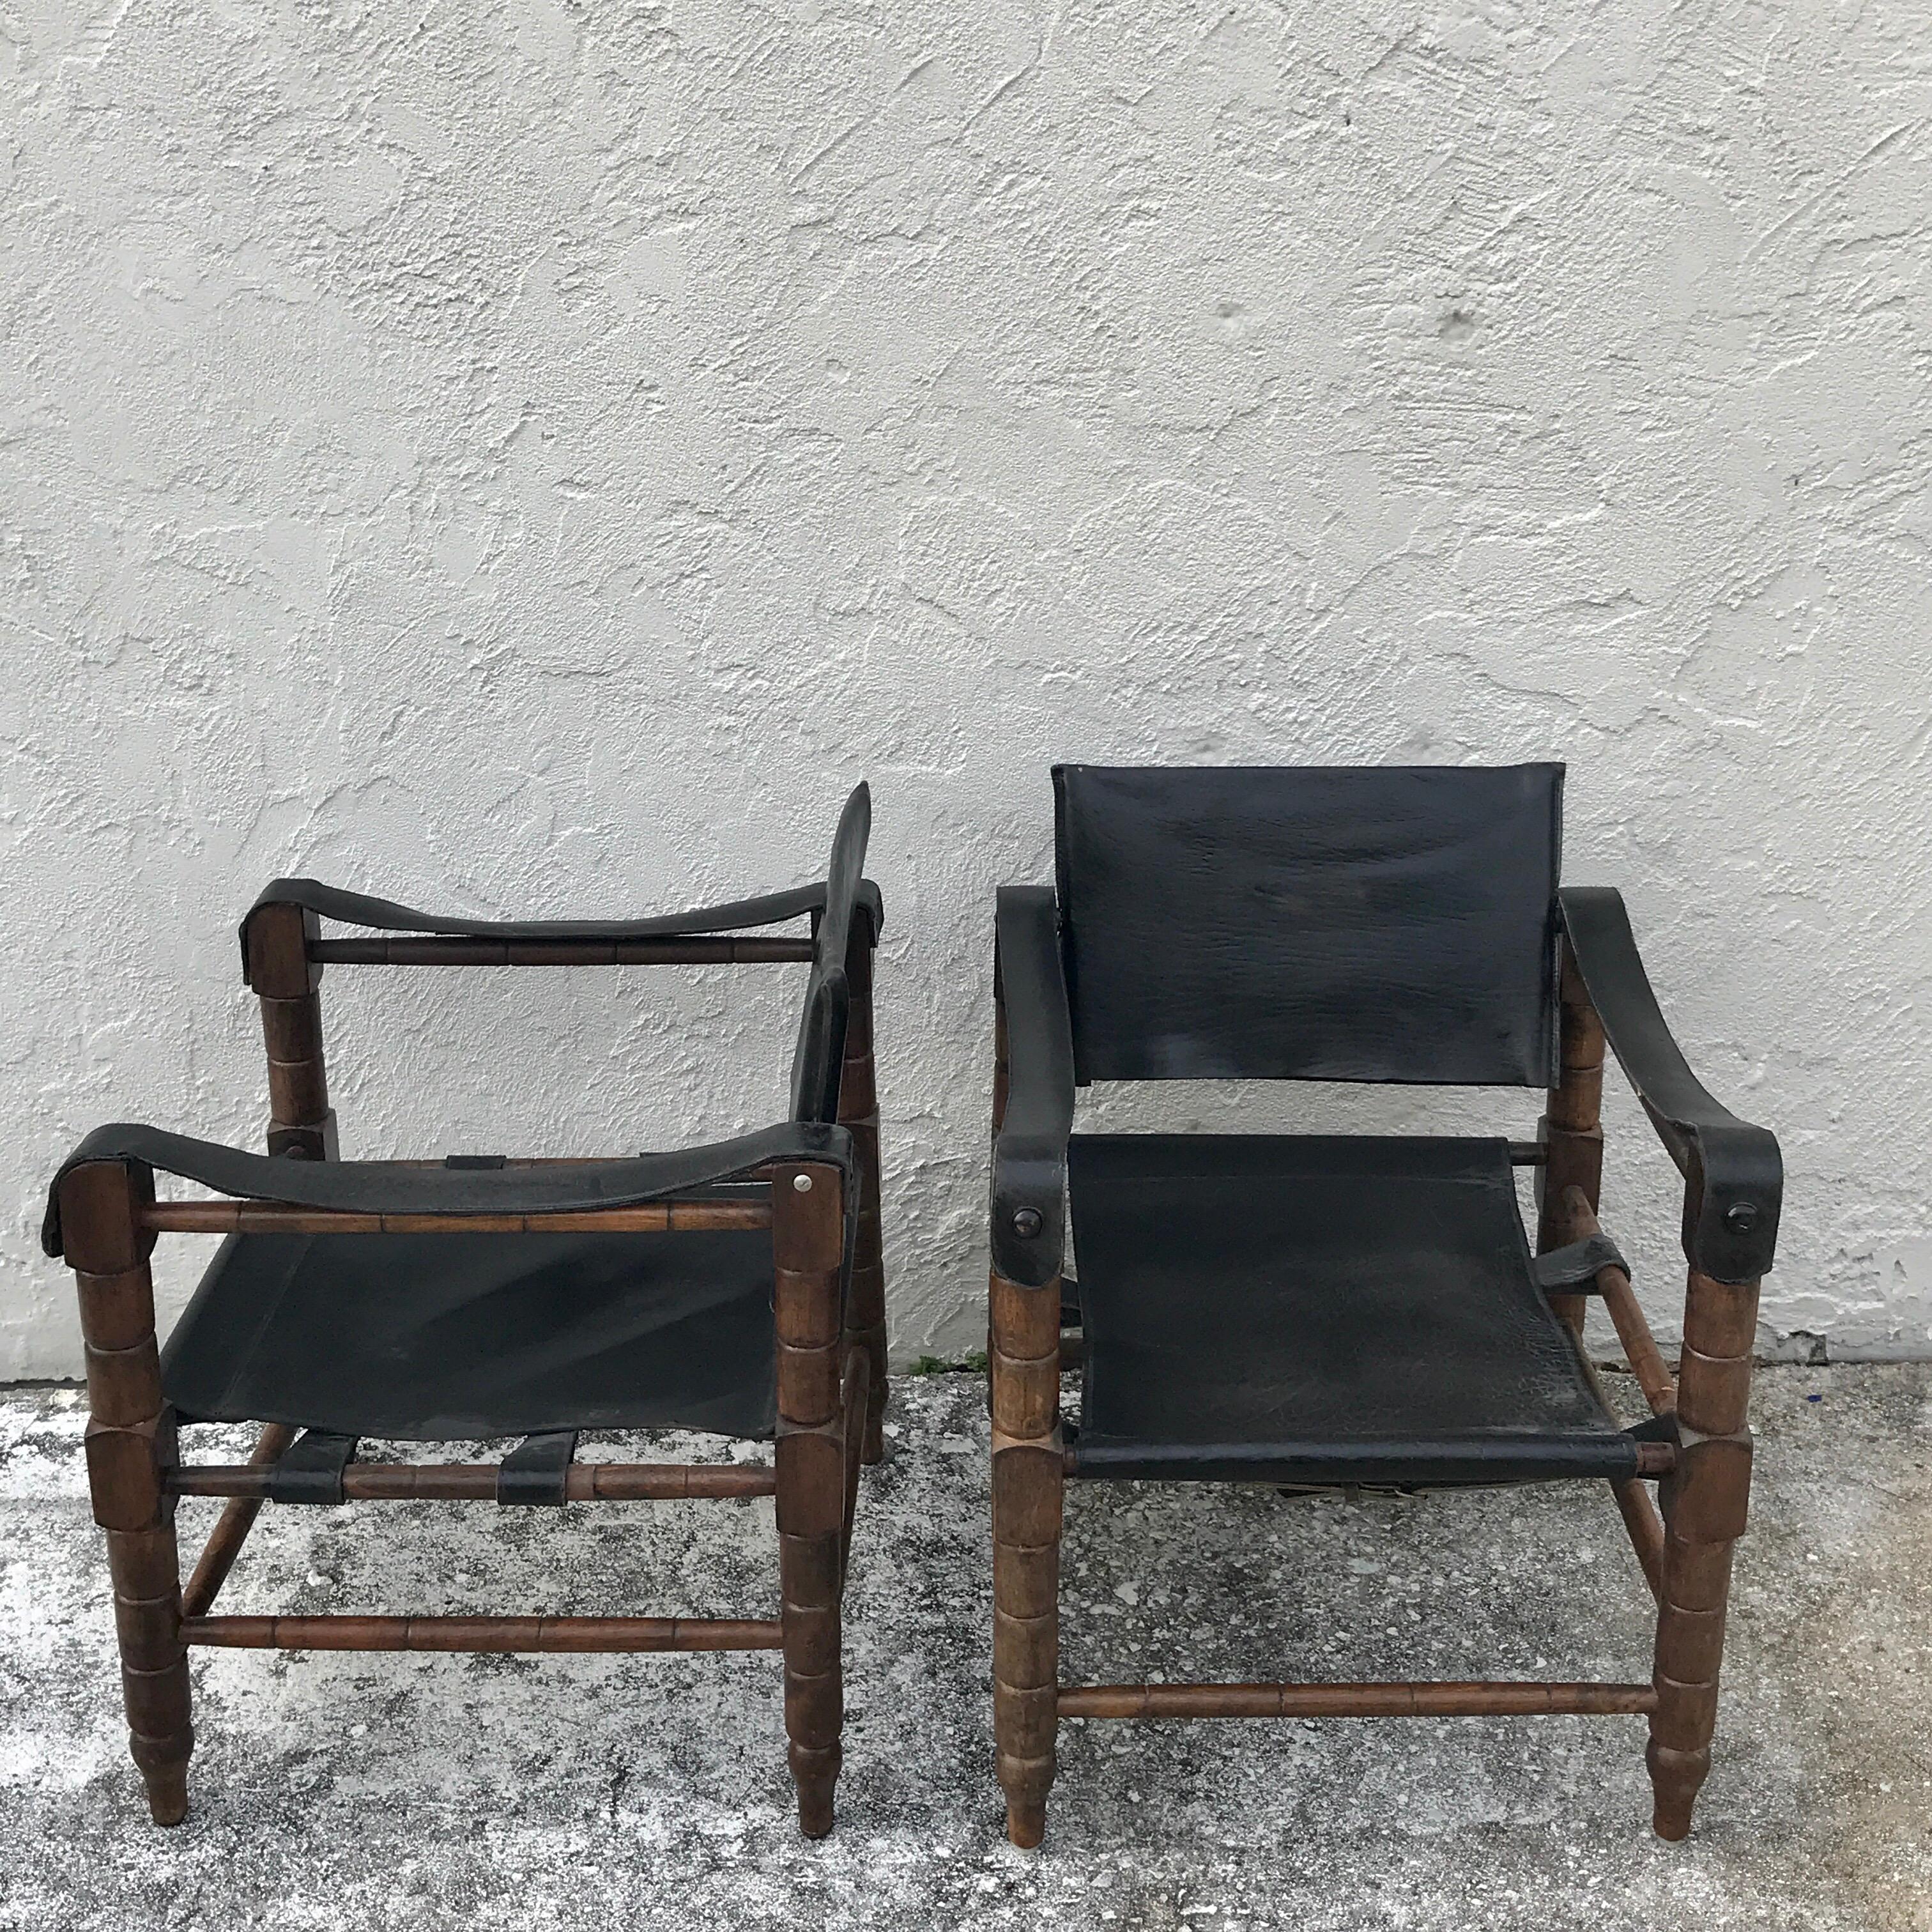 Pair of Syrian leather Campaign / Safari chairs, each one with subtly carved wood frames with black leather upholstery. Measures: Arm height is 24